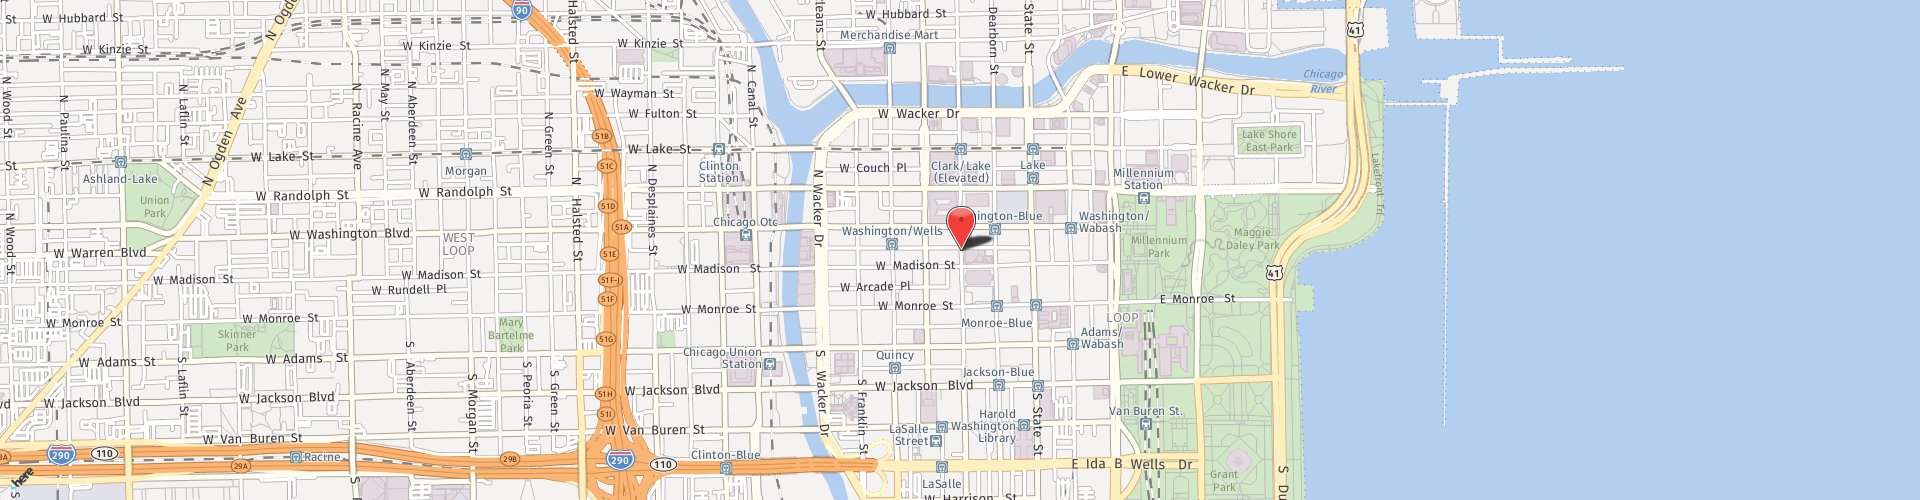 Location Map: 20 N. Clark St. Chicago, IL 60602